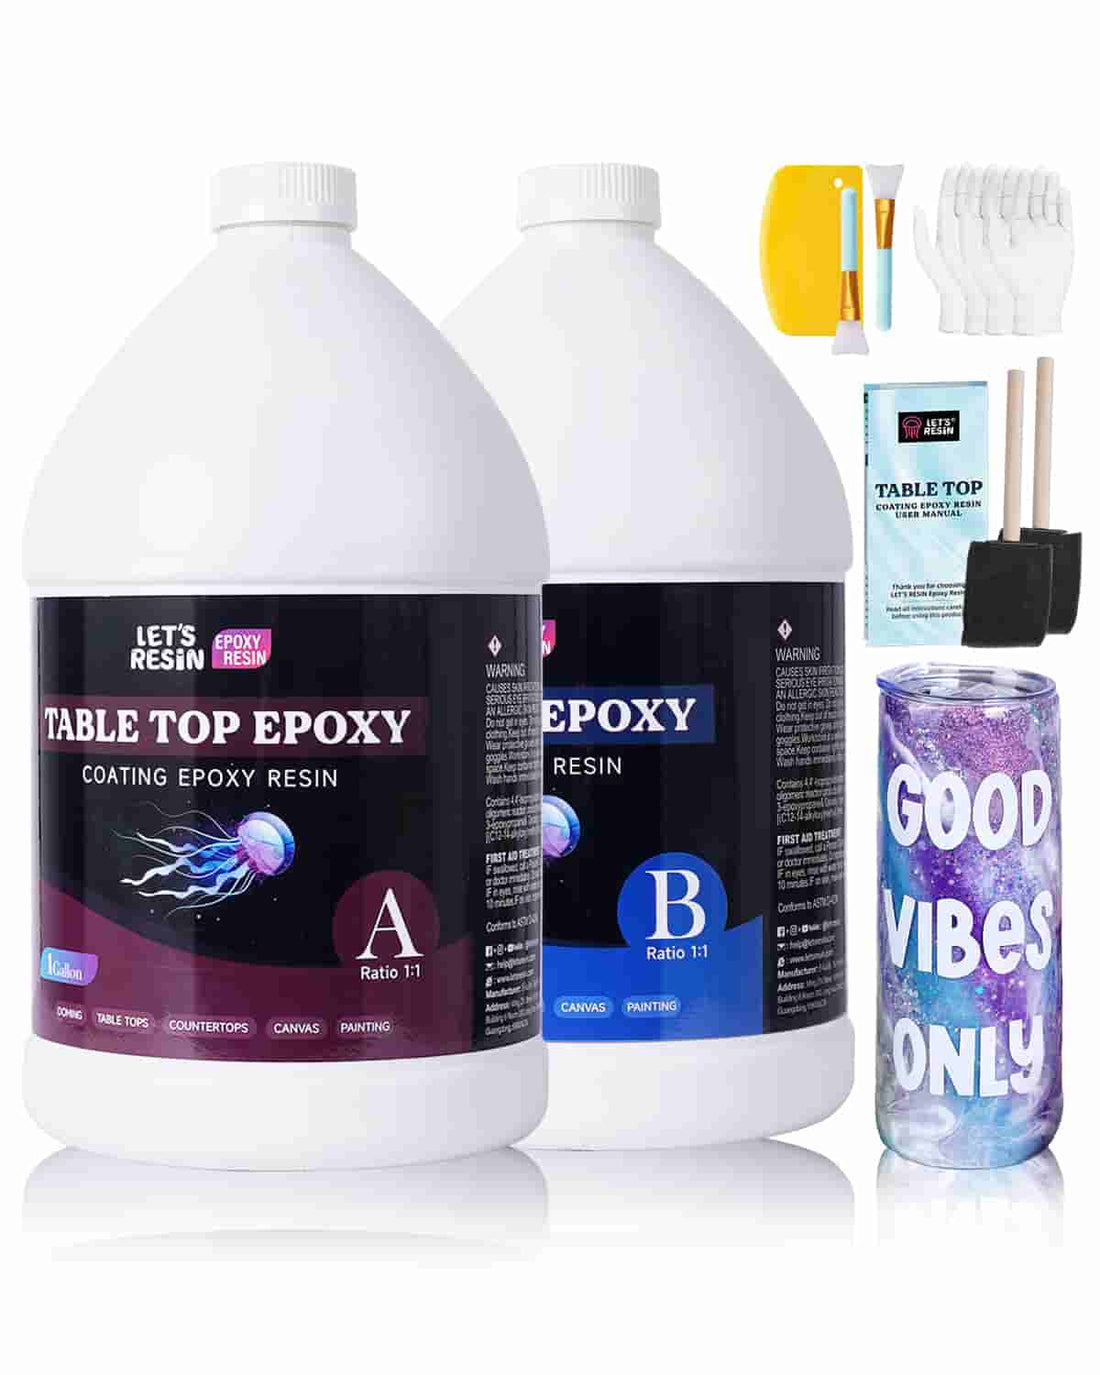 LET'S RESIN 2 Part Clear Epoxy Resin, 44OZ Crystal Clear Epoxy Resin for  Crafts, Fast Cure Resin for Coating,Table Top,Jewelry,Tumbler,Paintings,  Arts Casting Resin with Cups, Pigment Powder – Let's Resin